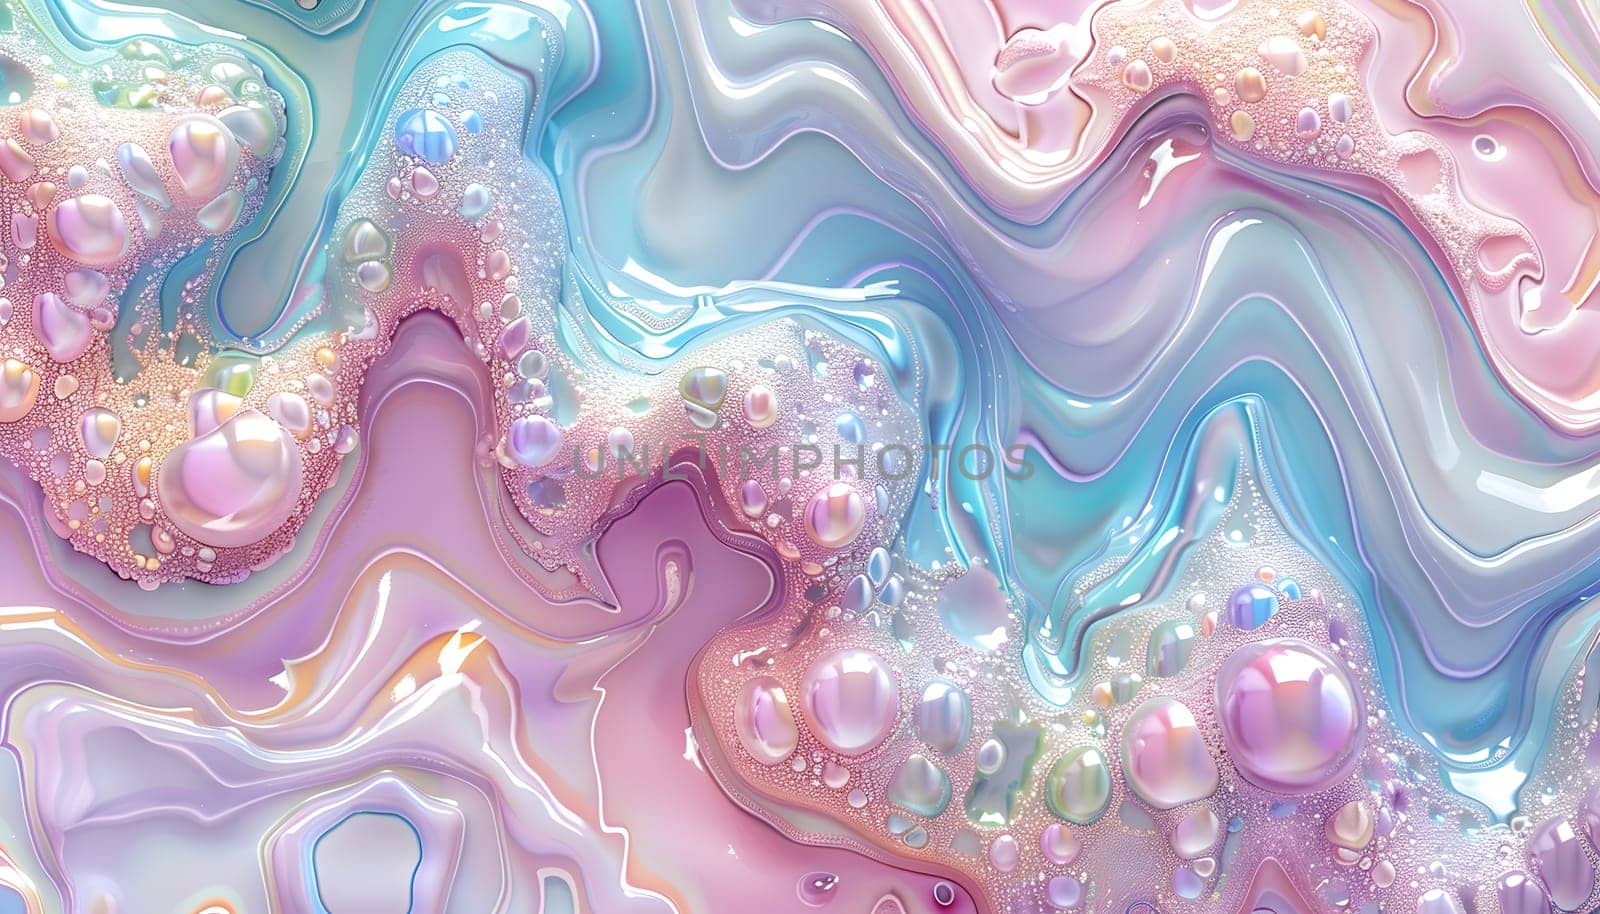 A close up of a vibrant marble texture in shades of azure, violet, and magenta, resembling an organism with bubbles and glitter. A stunning geological phenomenon captured in art on a textile pattern